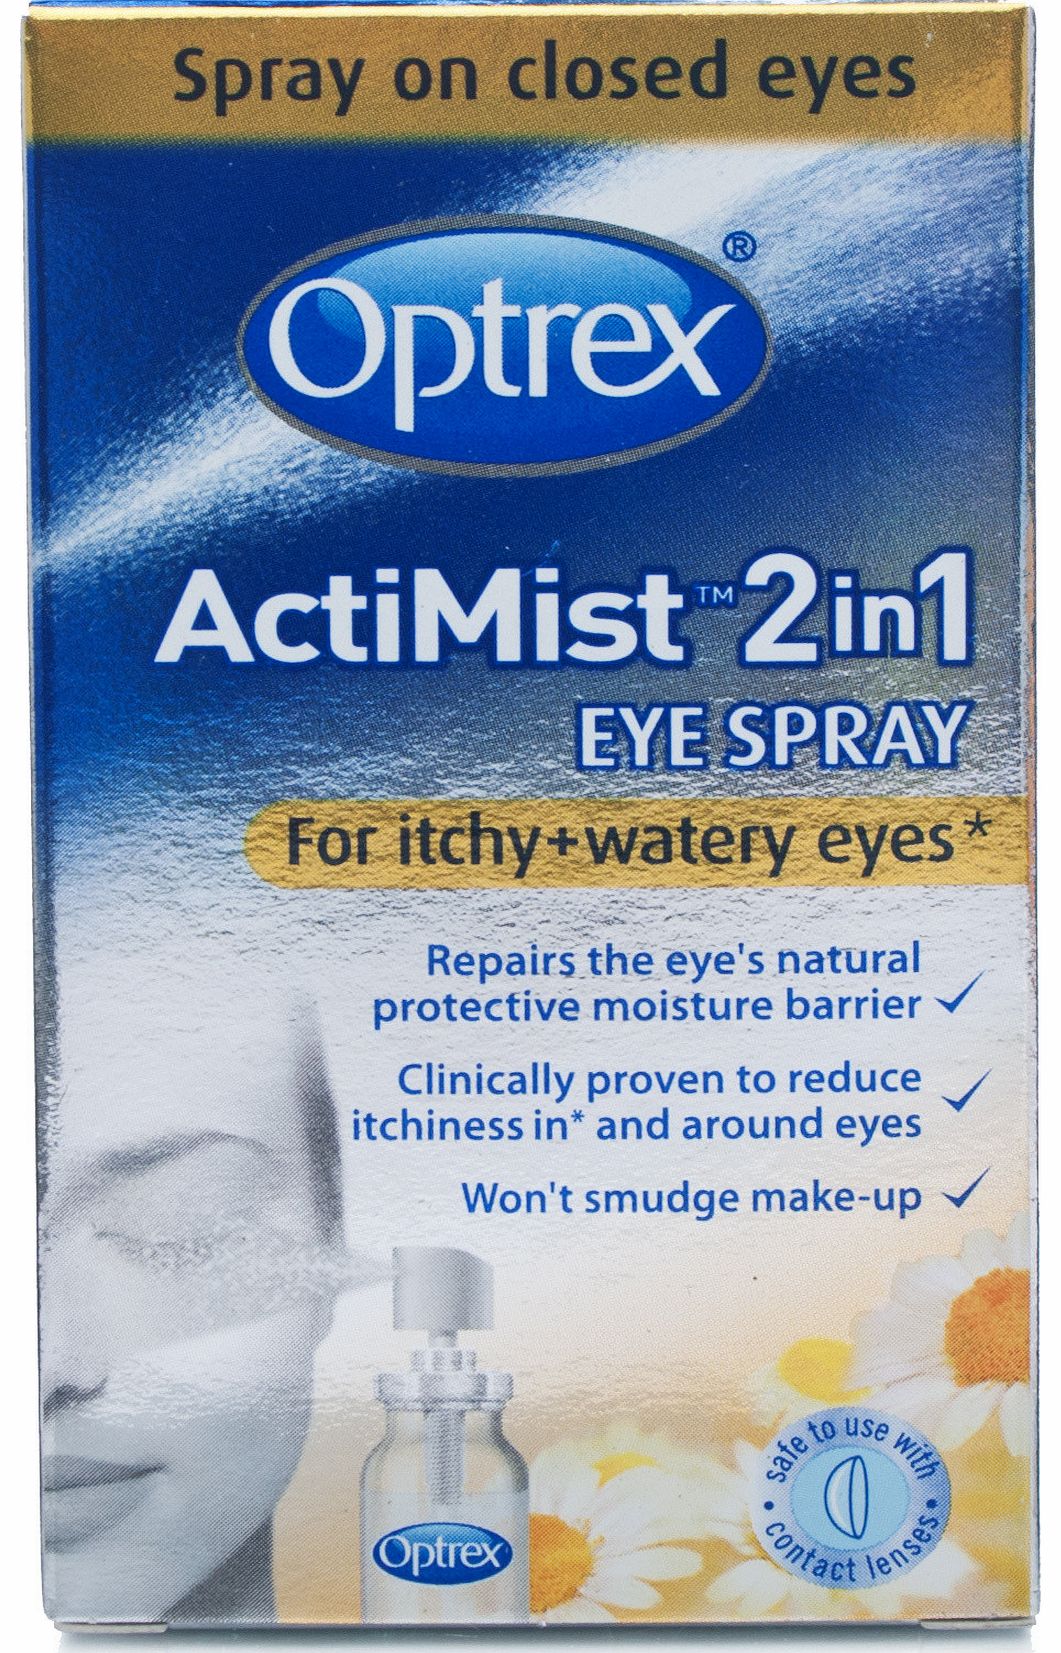 Optrex Actimist 2in1 for Itchy Watery Eyes